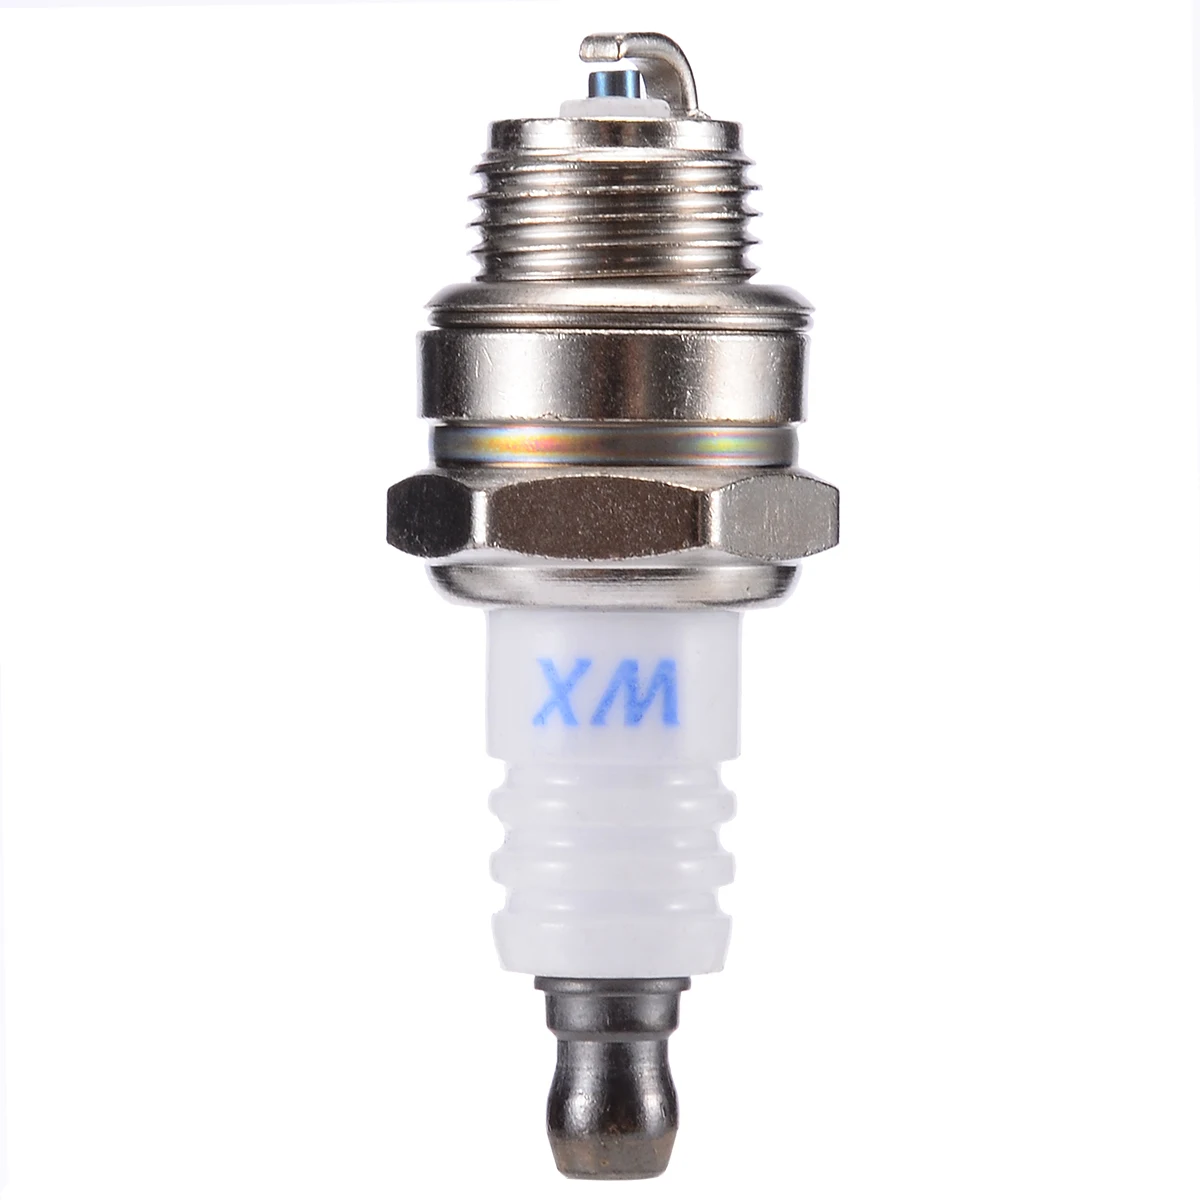 New Spark Plug Suit for MS341 MS361 MS390 MS441 MS460 MS440 Chainsaws Auto Ignition Replacemnet Parts